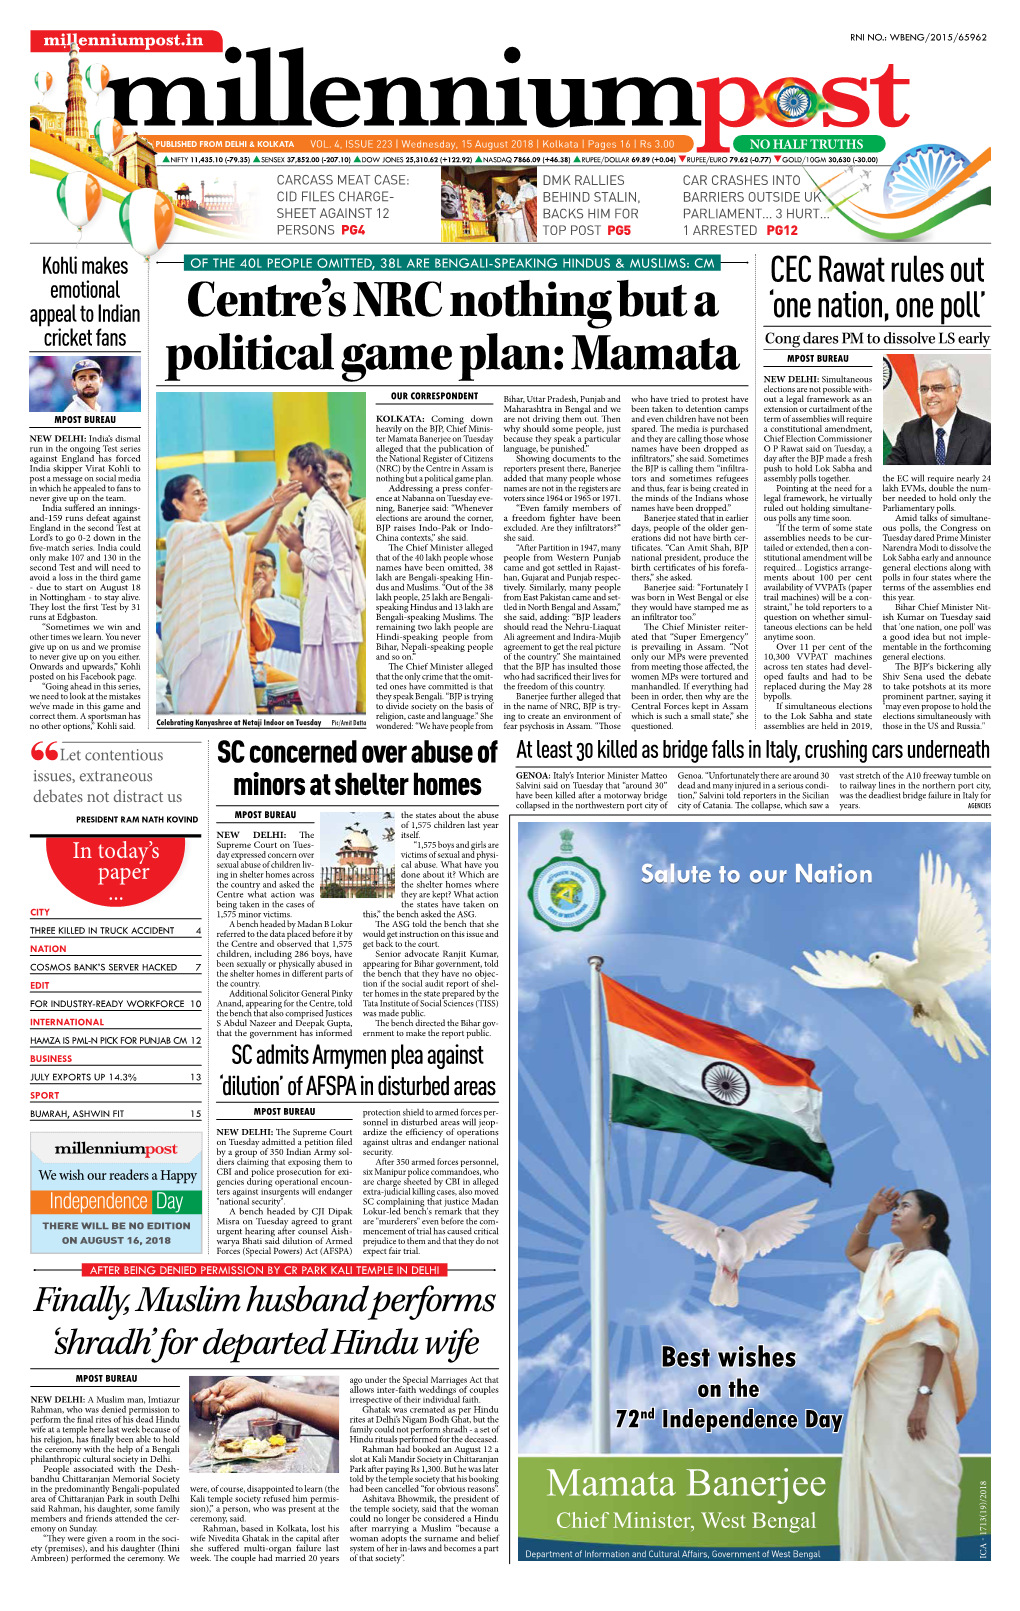 Centre's NRC Nothing but a Political Game Plan: Mamata